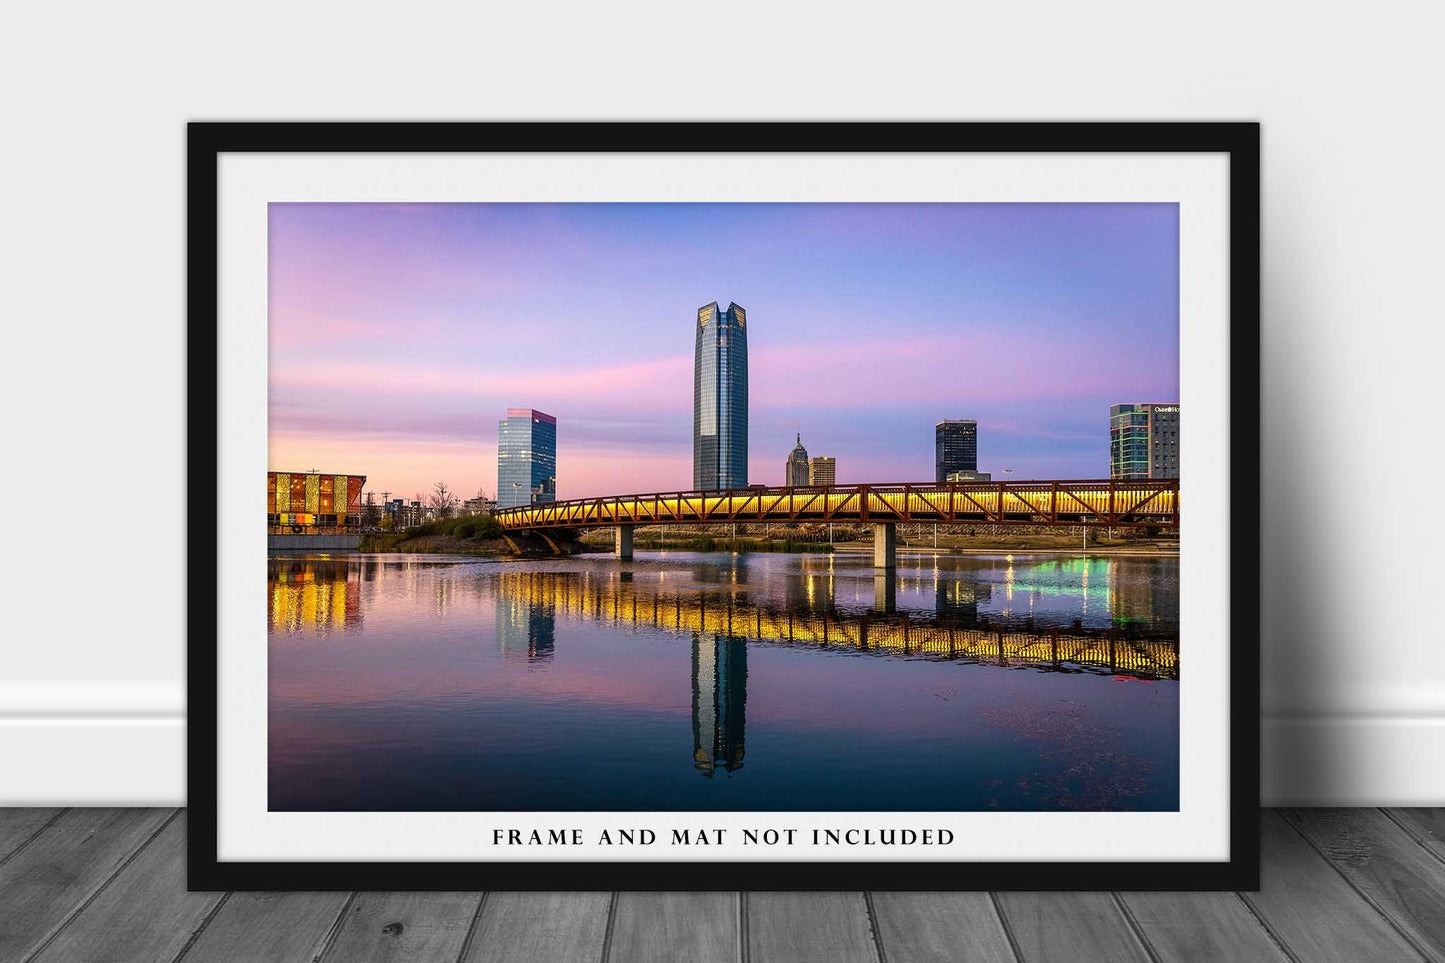 Urban Photography Print - Picture of Oklahoma City Skyline at Sunset in Scissortail Park - Architecture Wall Art Building Photo Decor